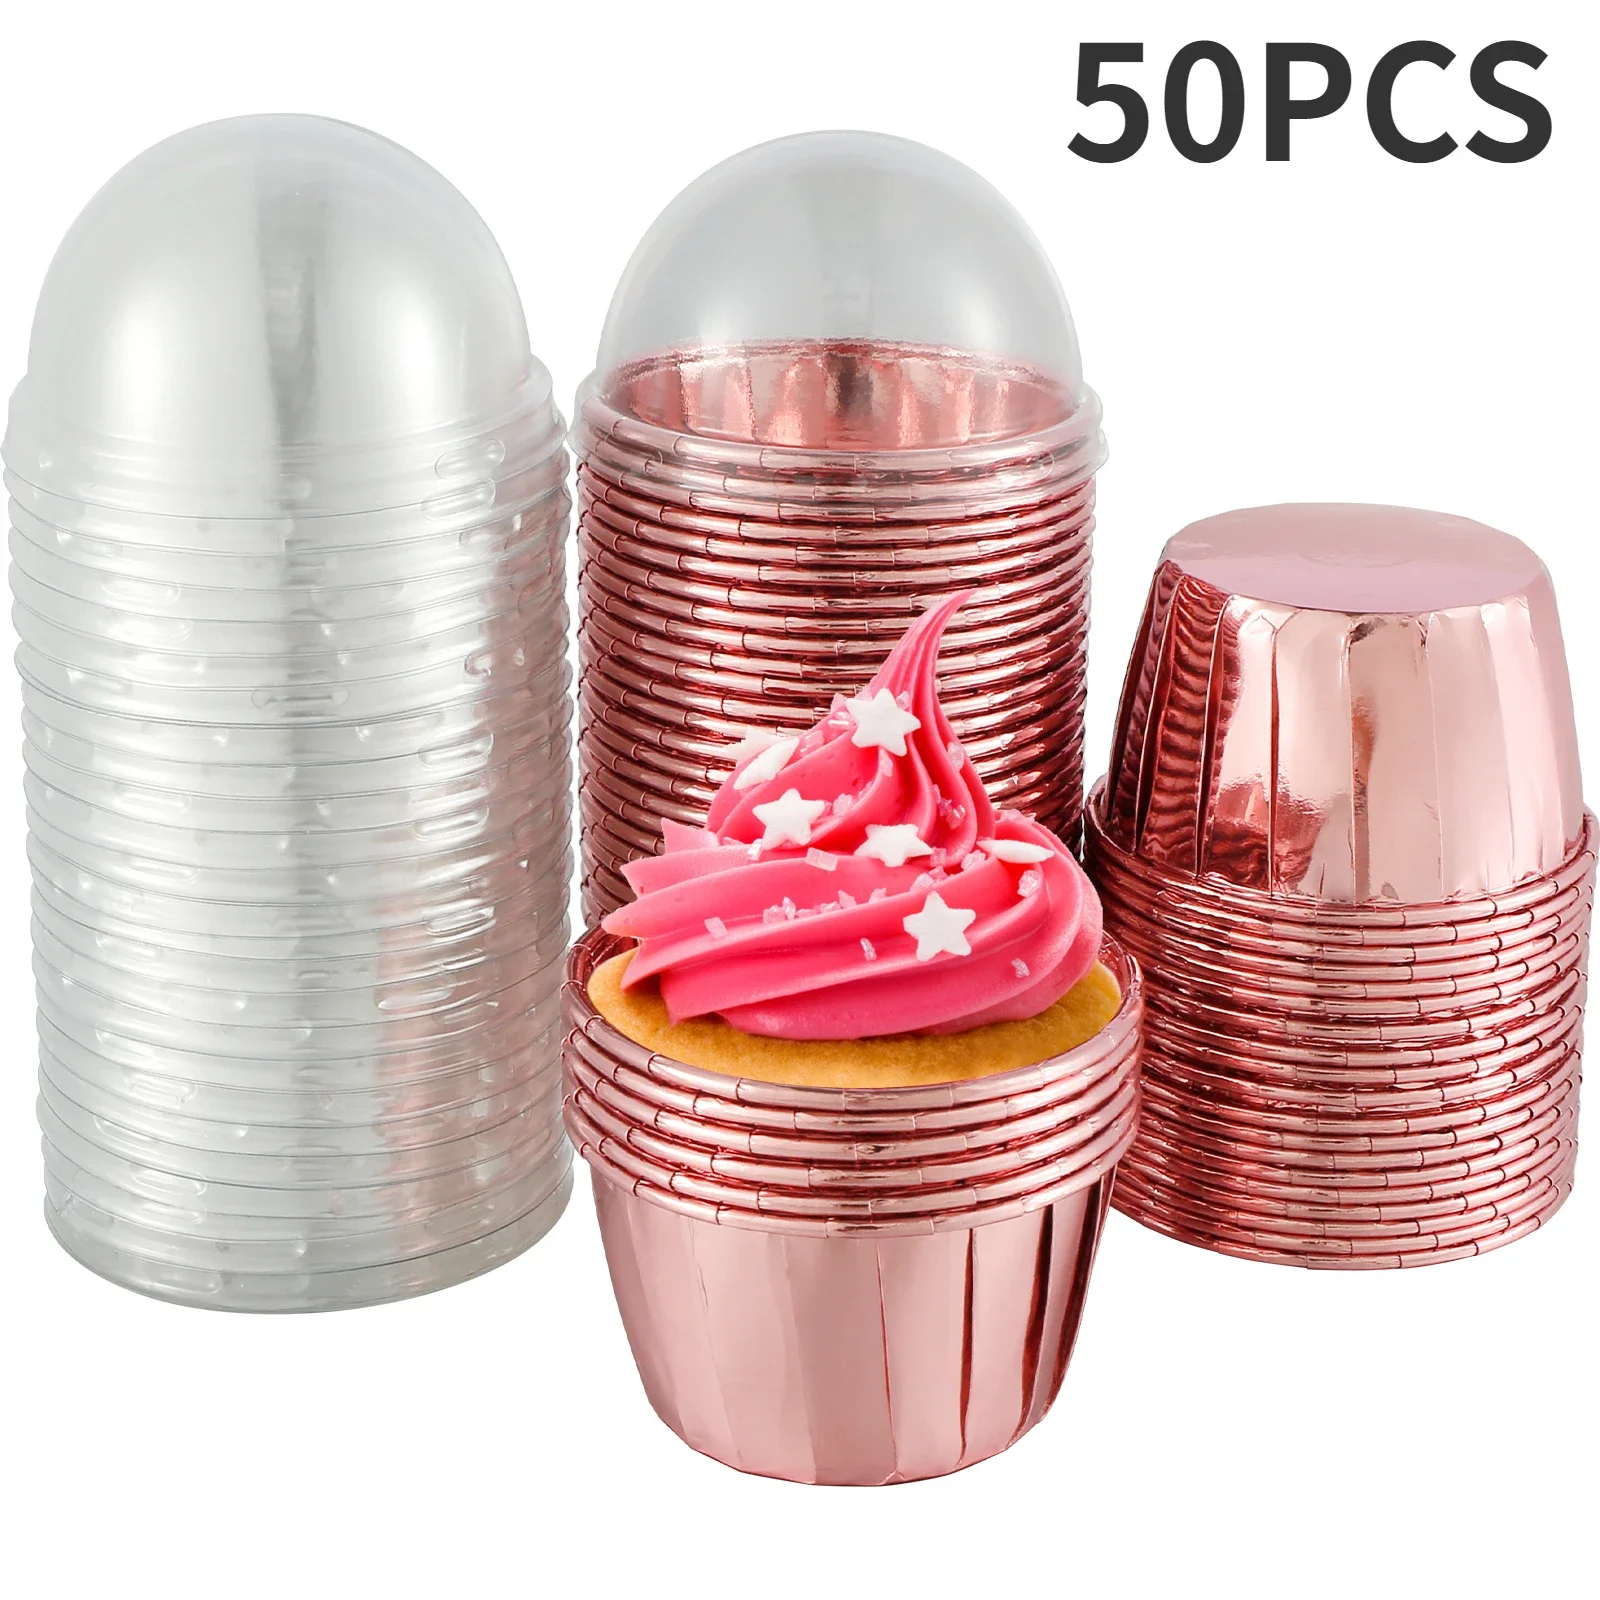 https://ae01.alicdn.com/kf/Sc69c056fdd0d4674989cac95276e0130U/50Pc-Foil-Cupcake-Liners-with-Lids-Heat-Resistant-5-5oz-Aluminum-Cake-Cups-Round-Foil-Baking.jpg